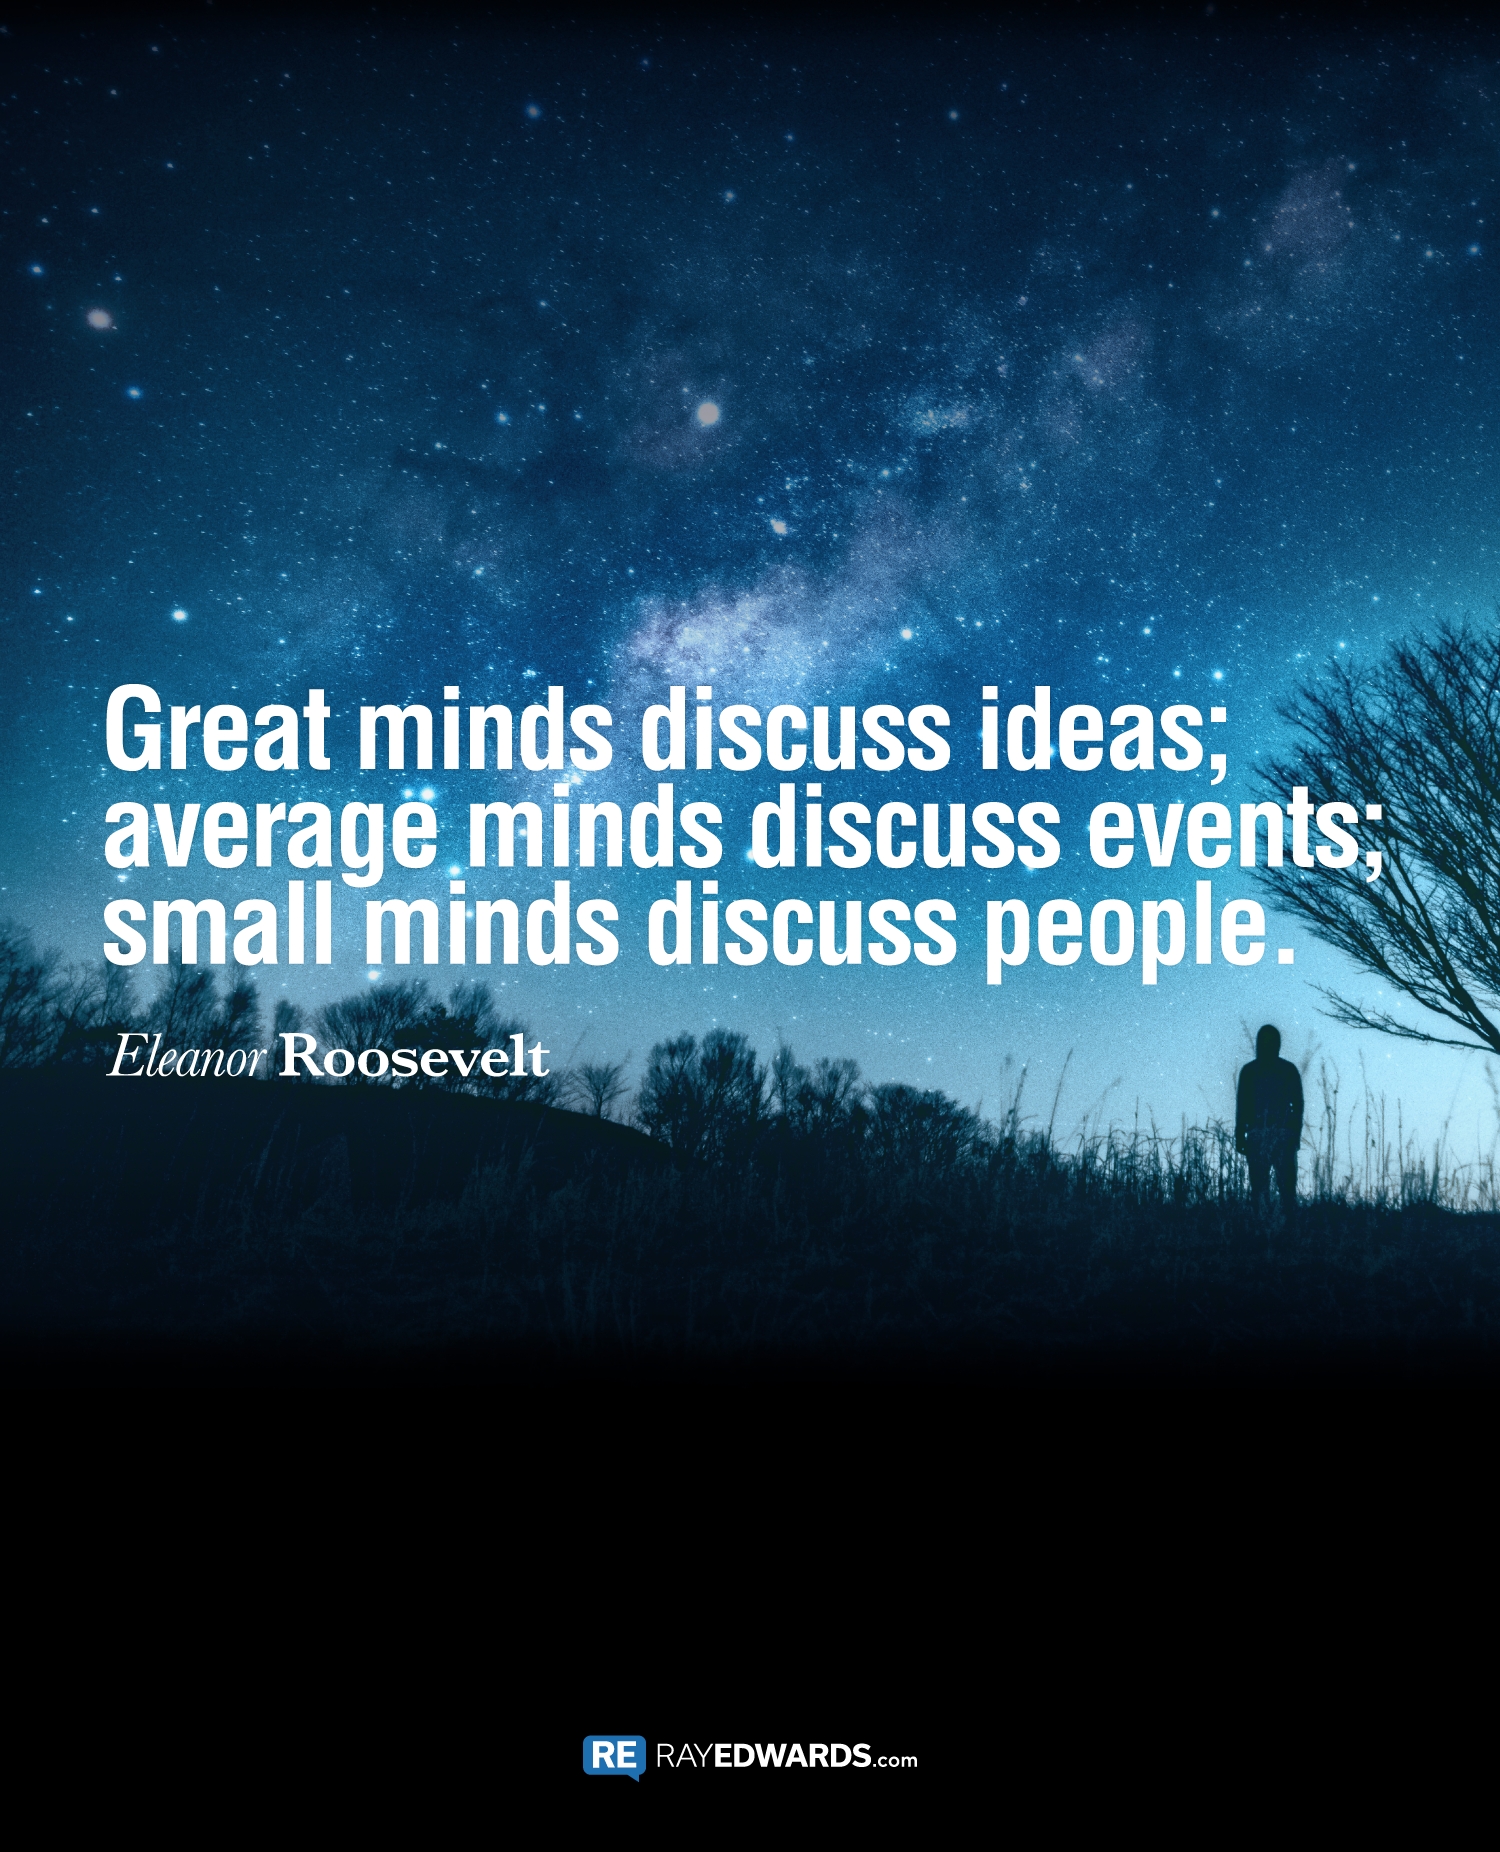 10 Pretty Great Minds Discuss Ideas Average Minds Discuss Events great minds discuss ideas quote meaning best quote 2017 2022